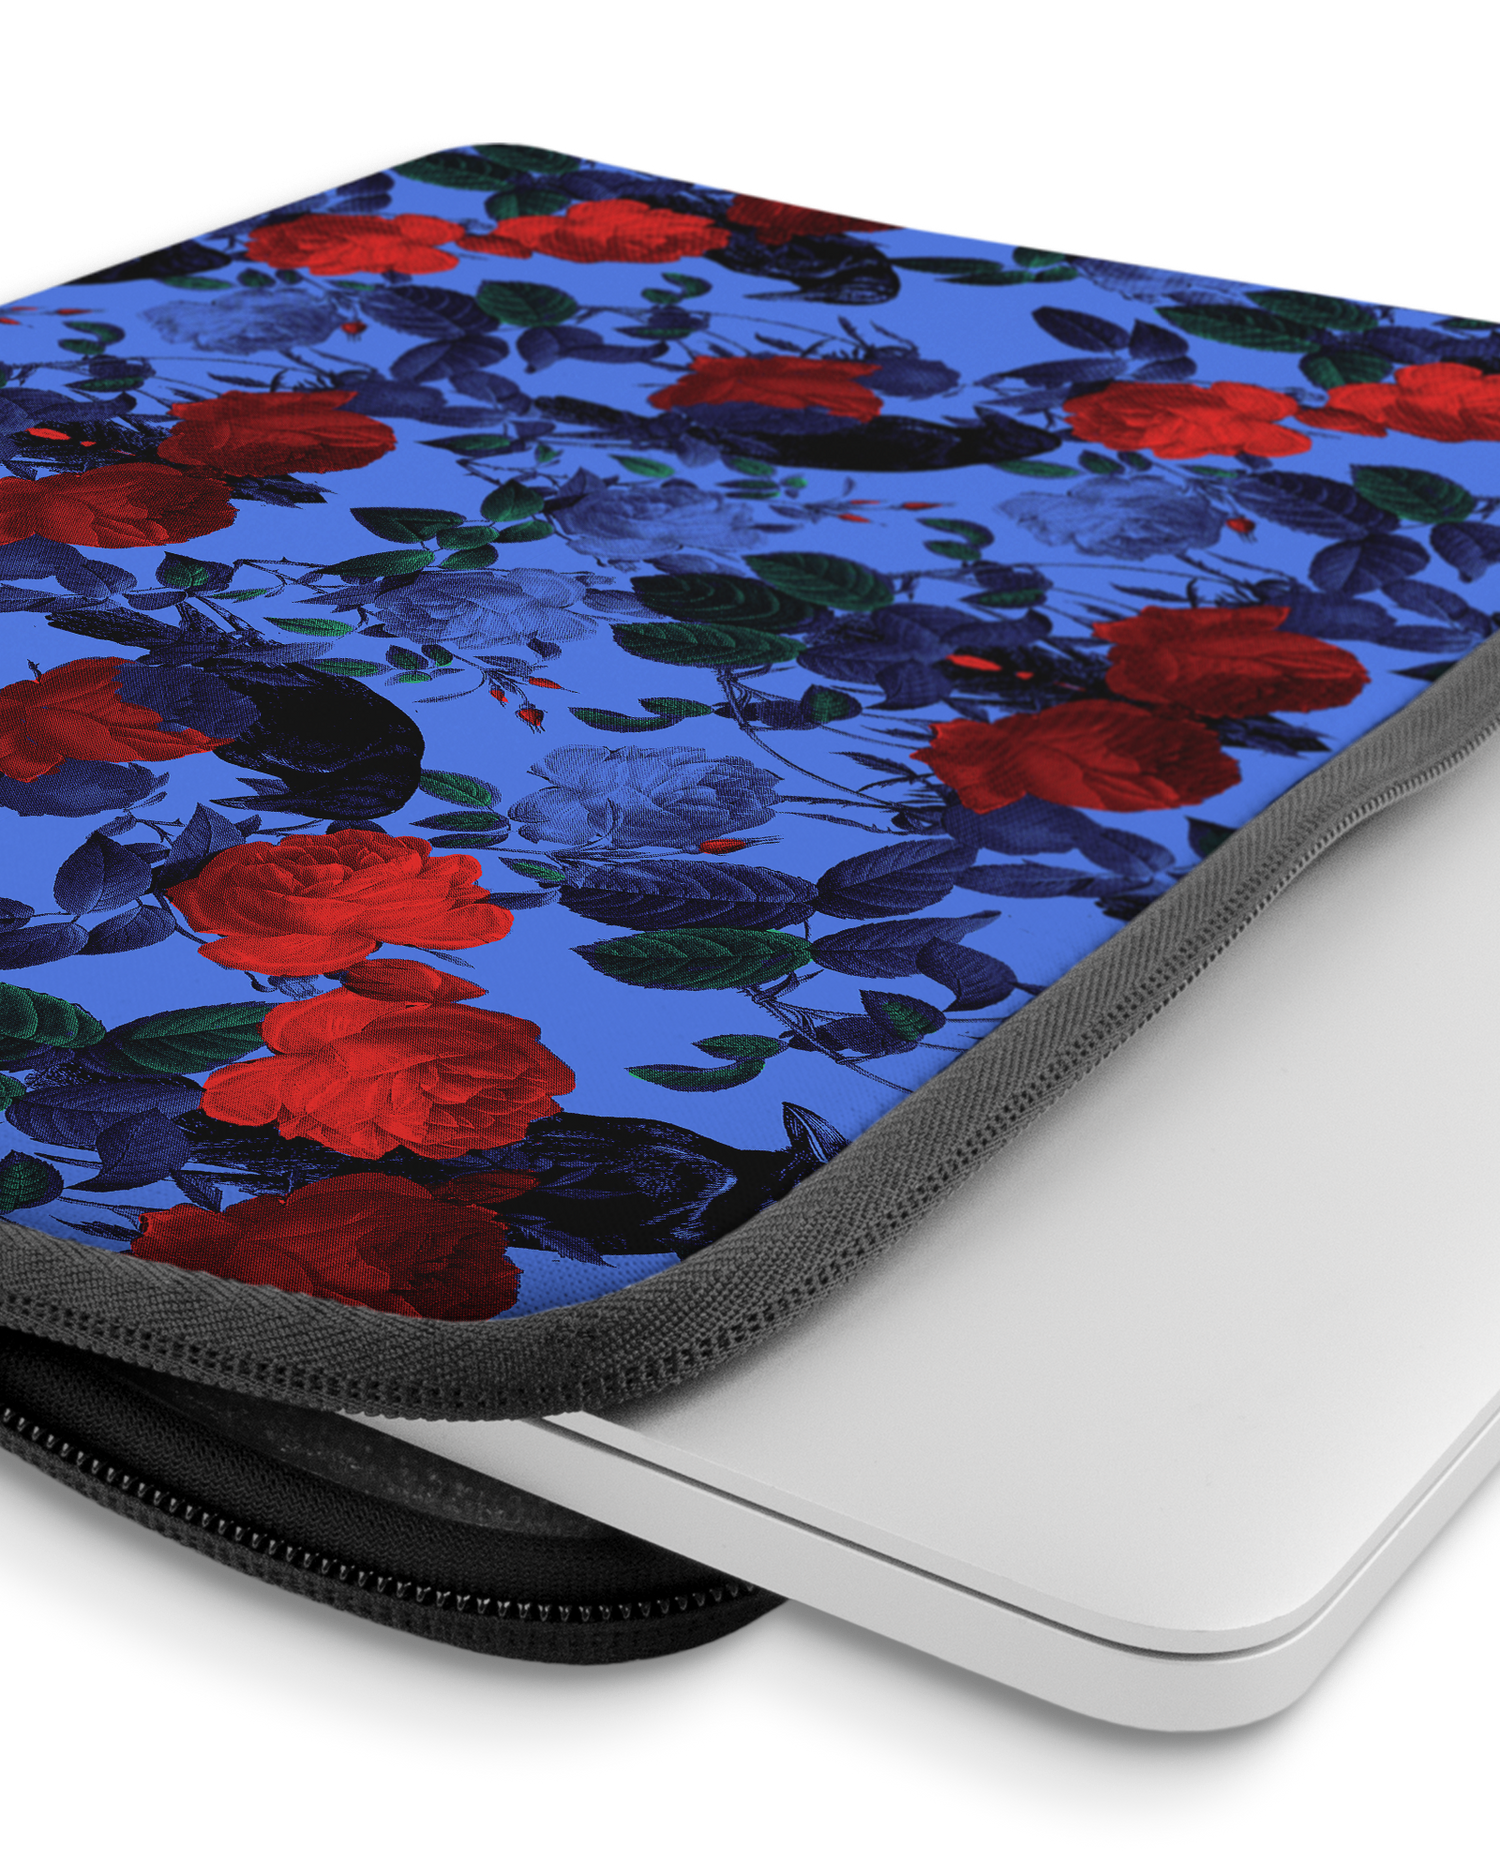 Roses And Ravens Laptop Case 14 inch with device inside